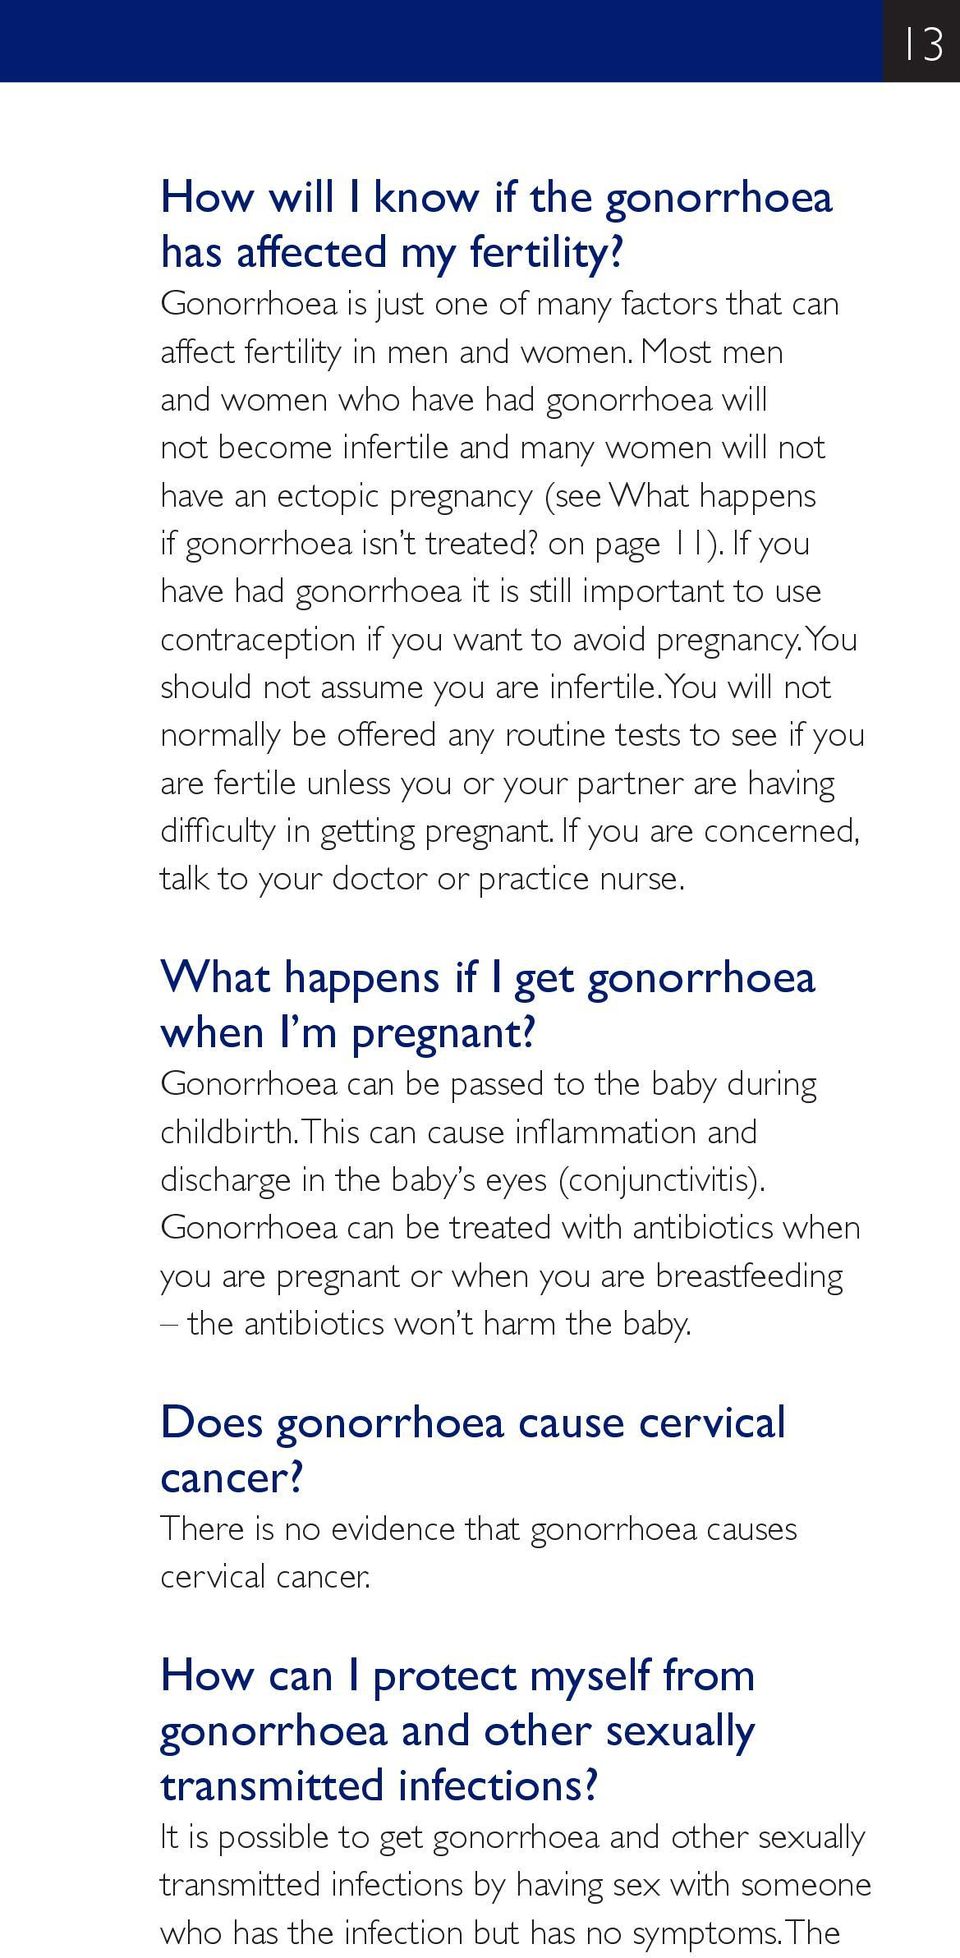 If you have had gonorrhoea it is still important to use contraception if you want to avoid pregnancy. You should not assume you are infertile.